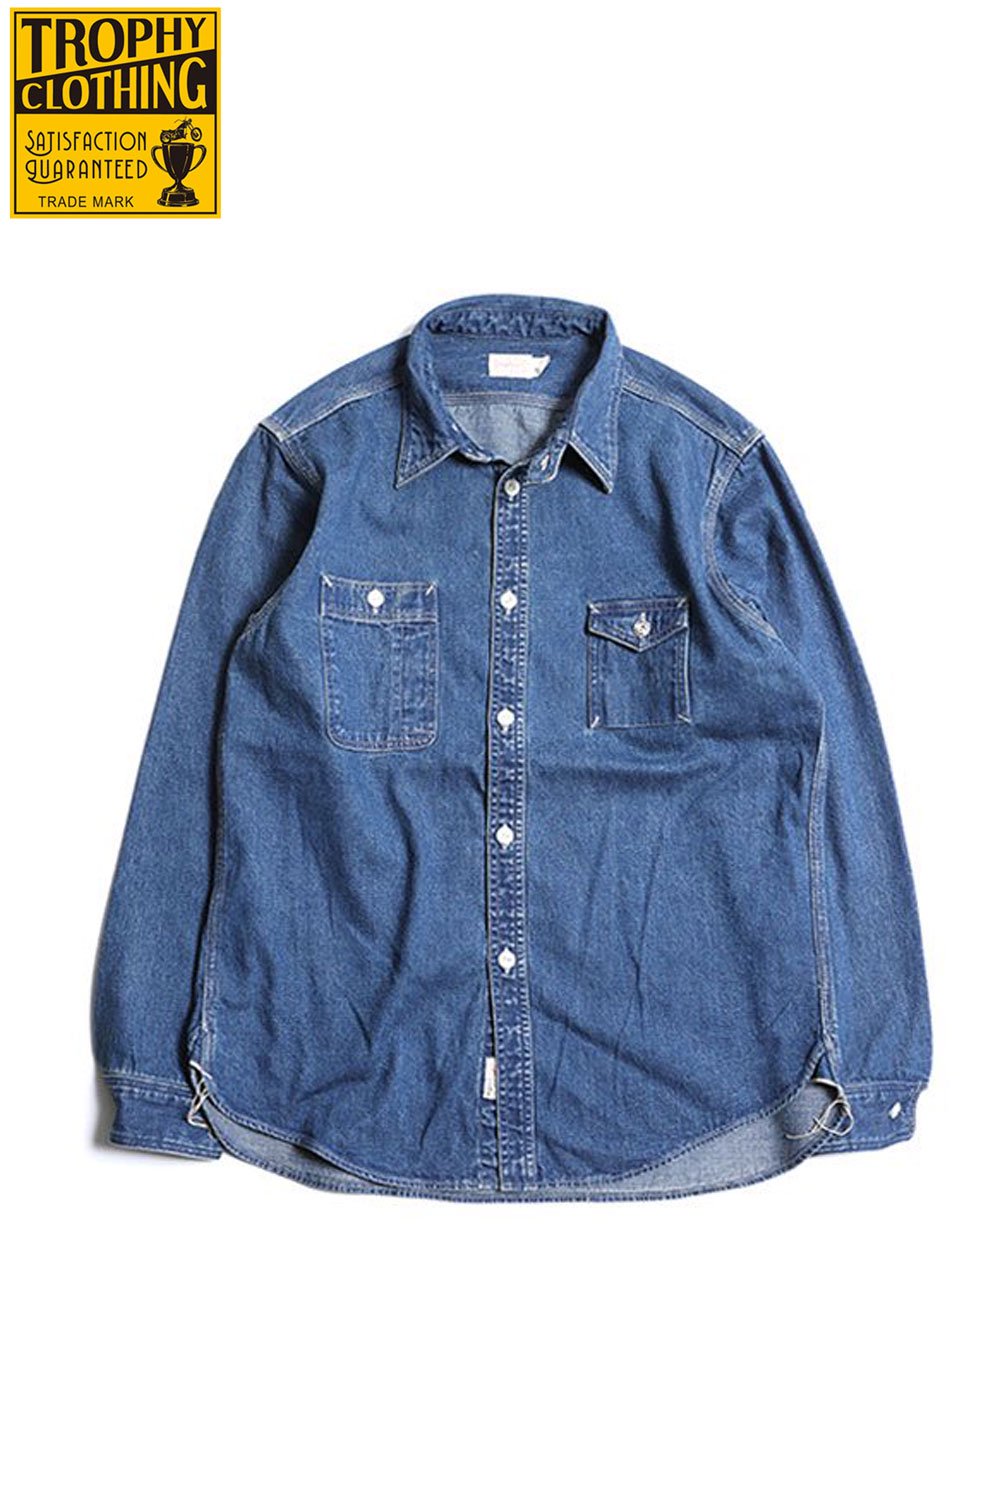 TROPHY CLOTHING(トロフィークロージング) セルビッチデニムシャツ MACHINE AGE SHIRT -VINTAGE WASH-  TR22AW-402 通販正規取扱 | ハーレムストア公式通販サイト